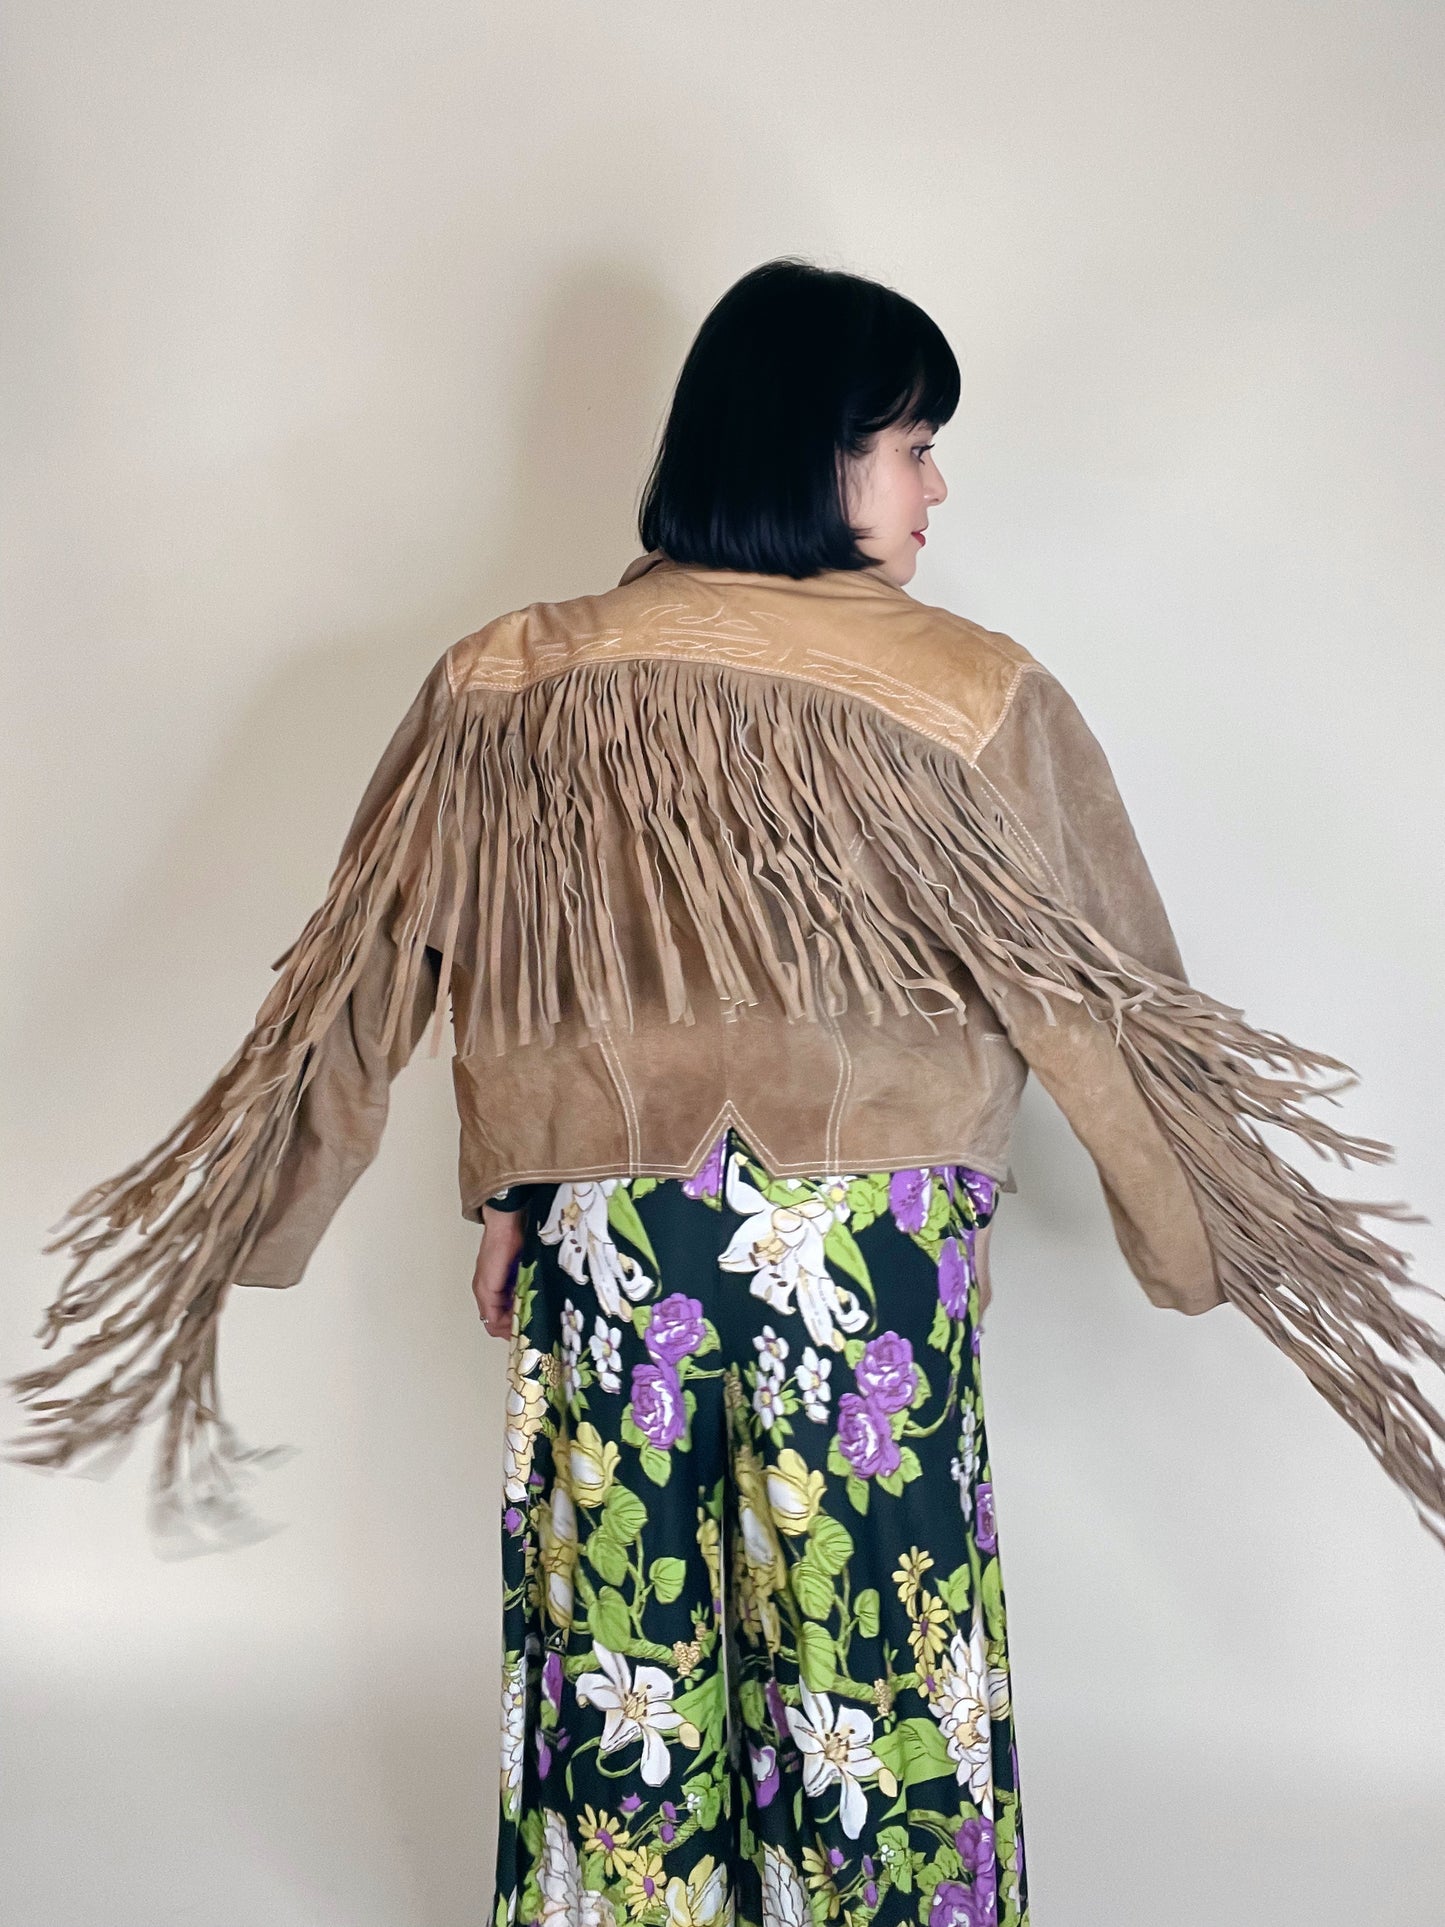 Vintage 70s "Moose Lake Lodge by Avanti" Tan Suede and Leather Jacket with Fringe Best Fits Sizes S-XL